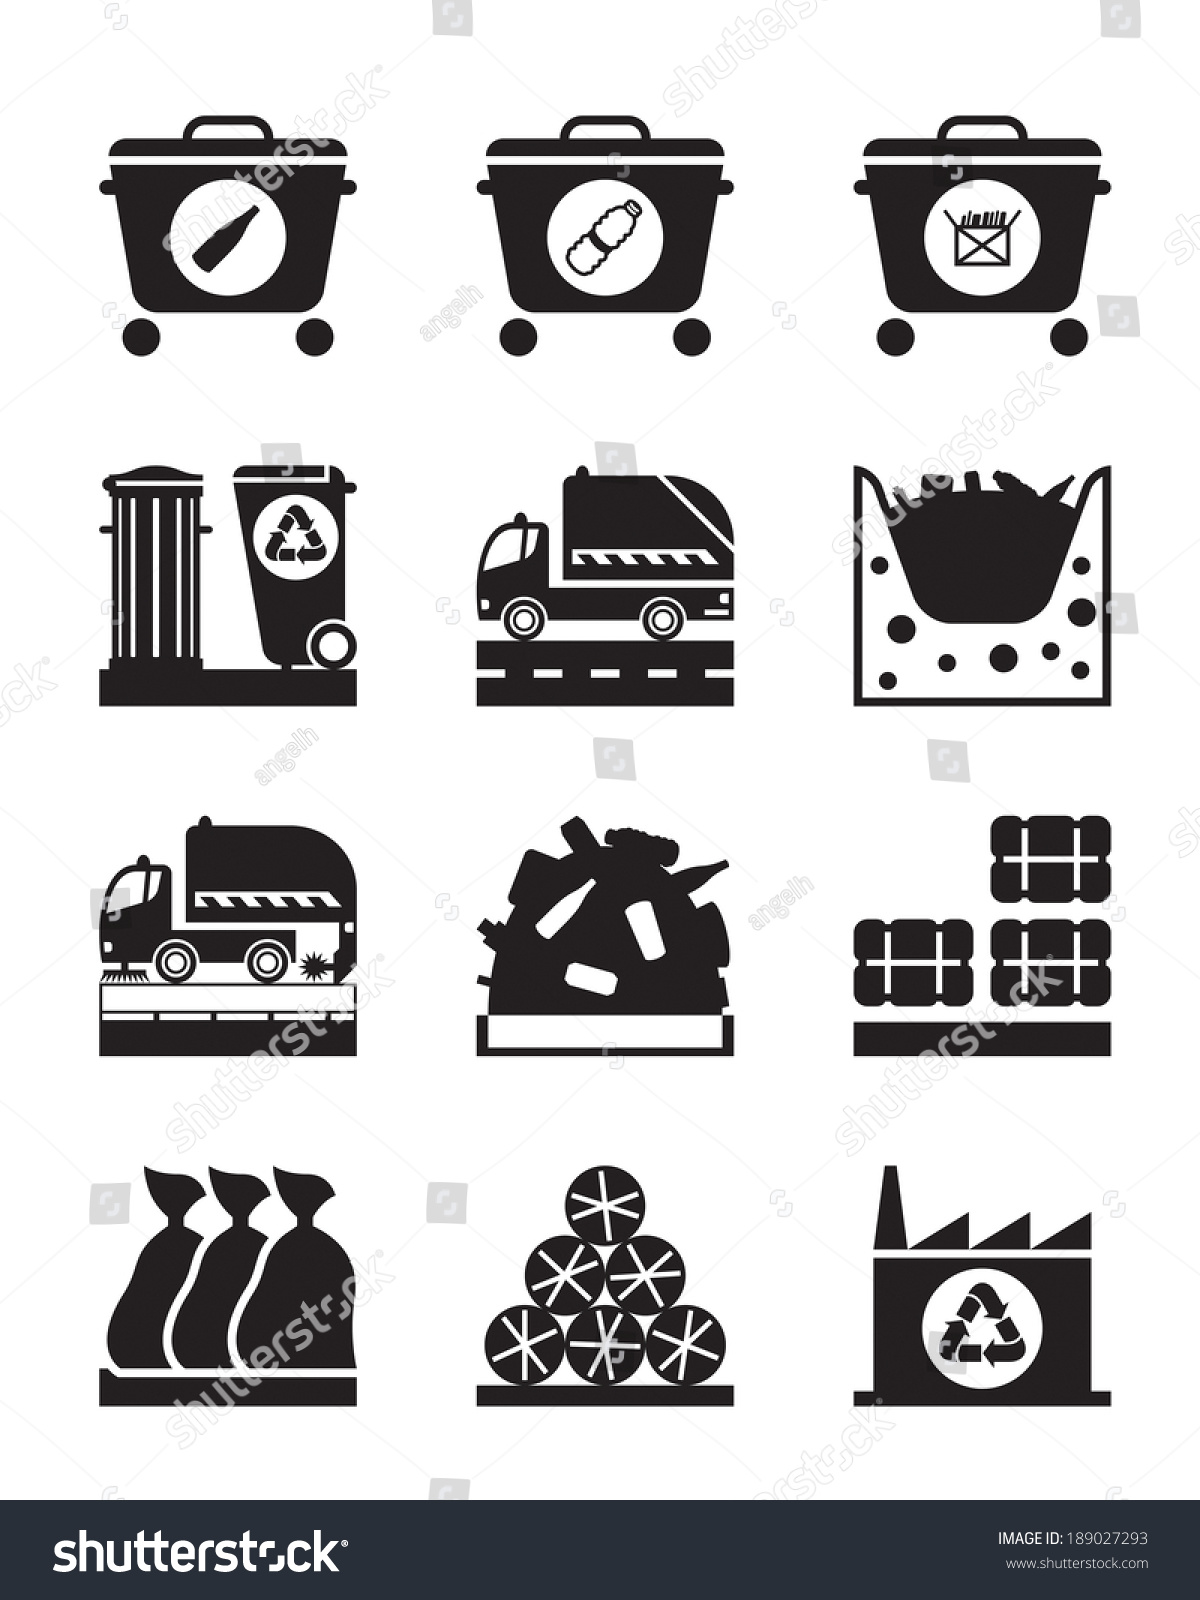 SVG of Collection and processing of garbage - vector illustration svg